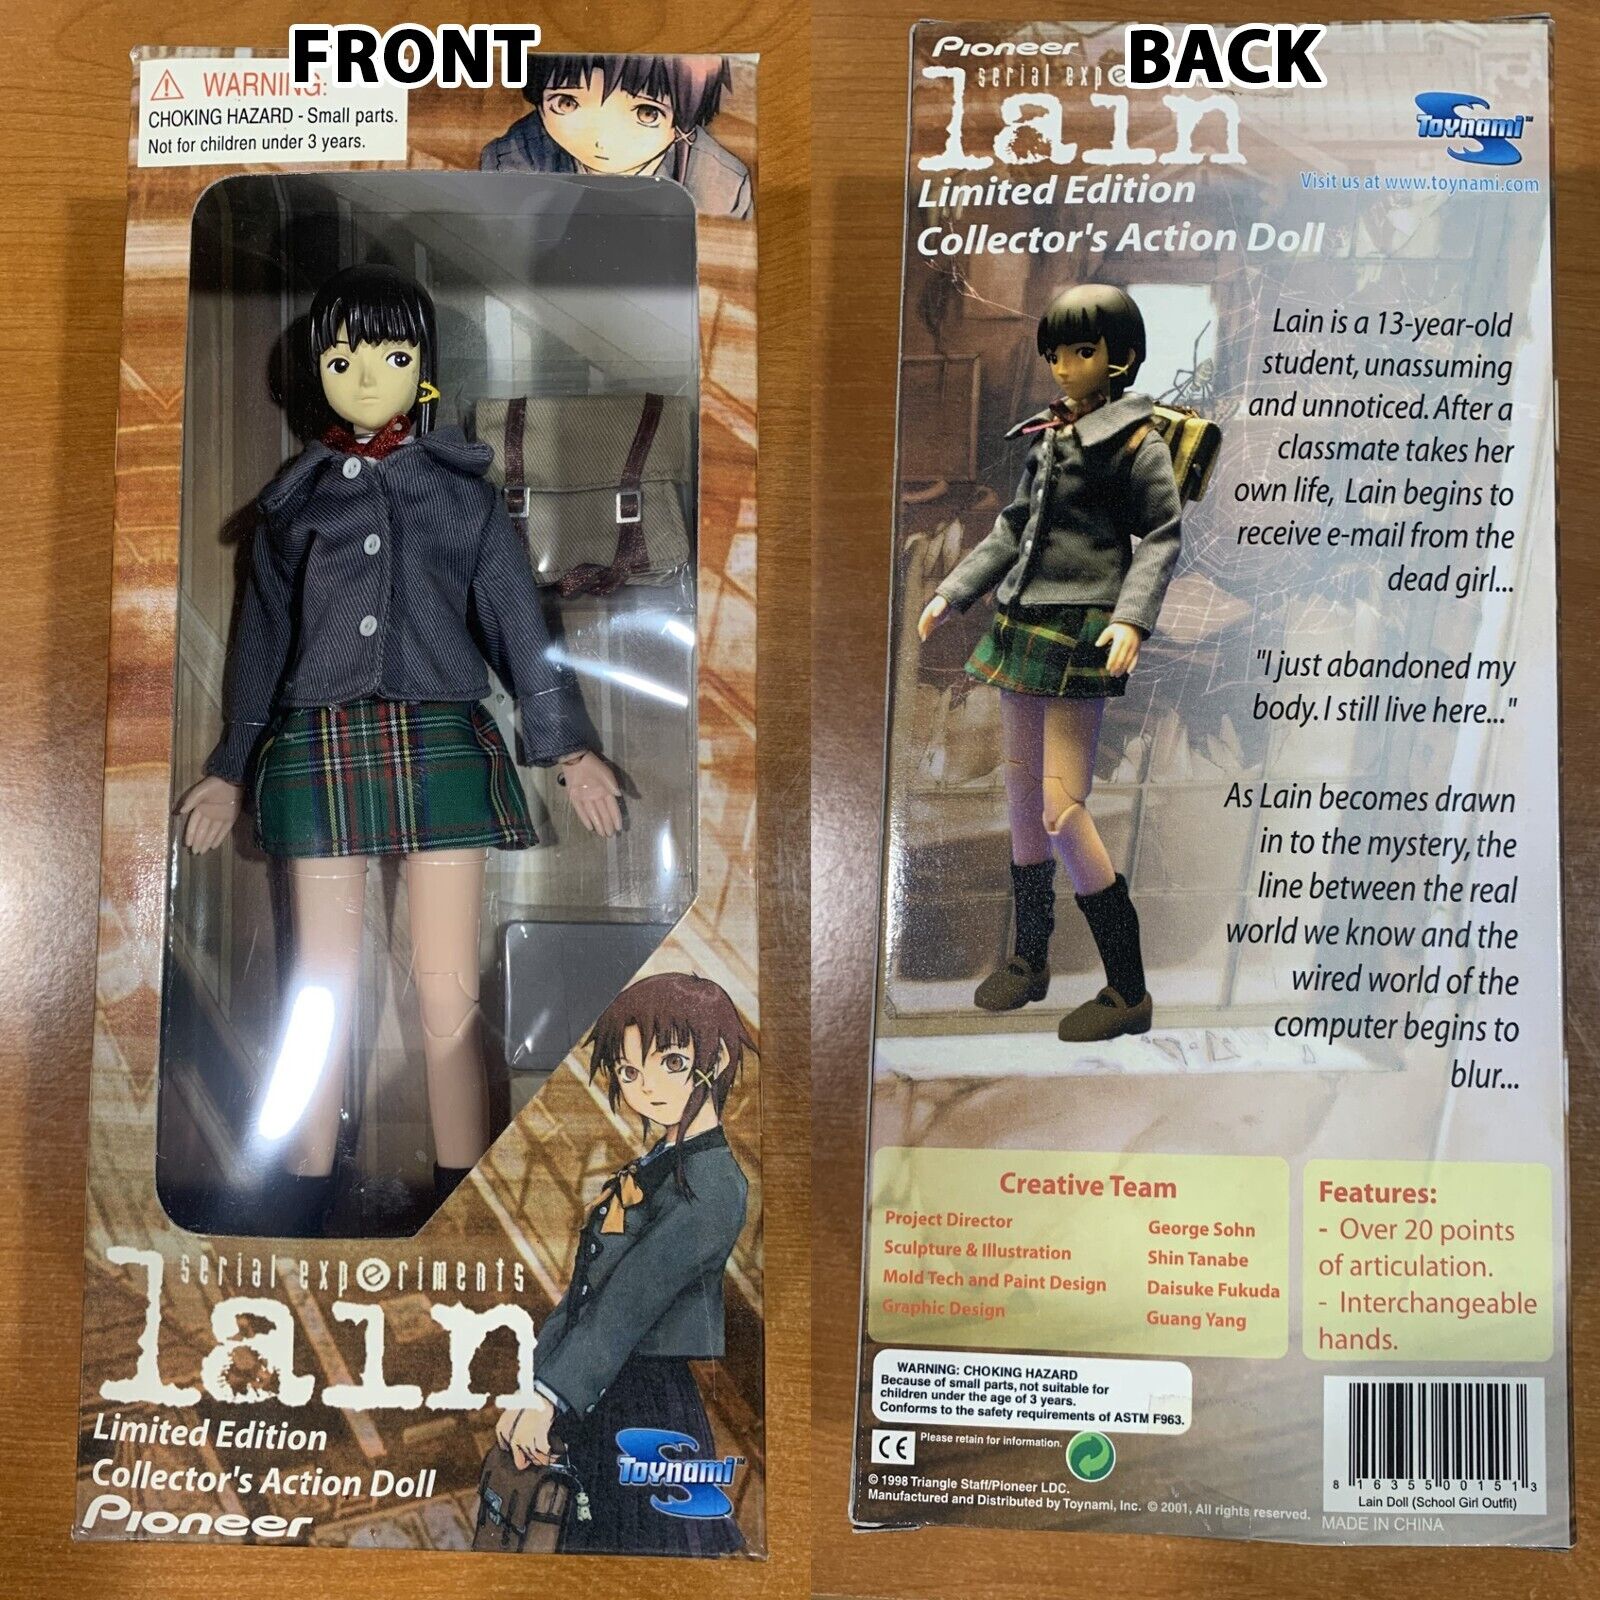 1998 TOYNAMI Serial Experiments Lain Limited Edition Collector's Action Doll NIB